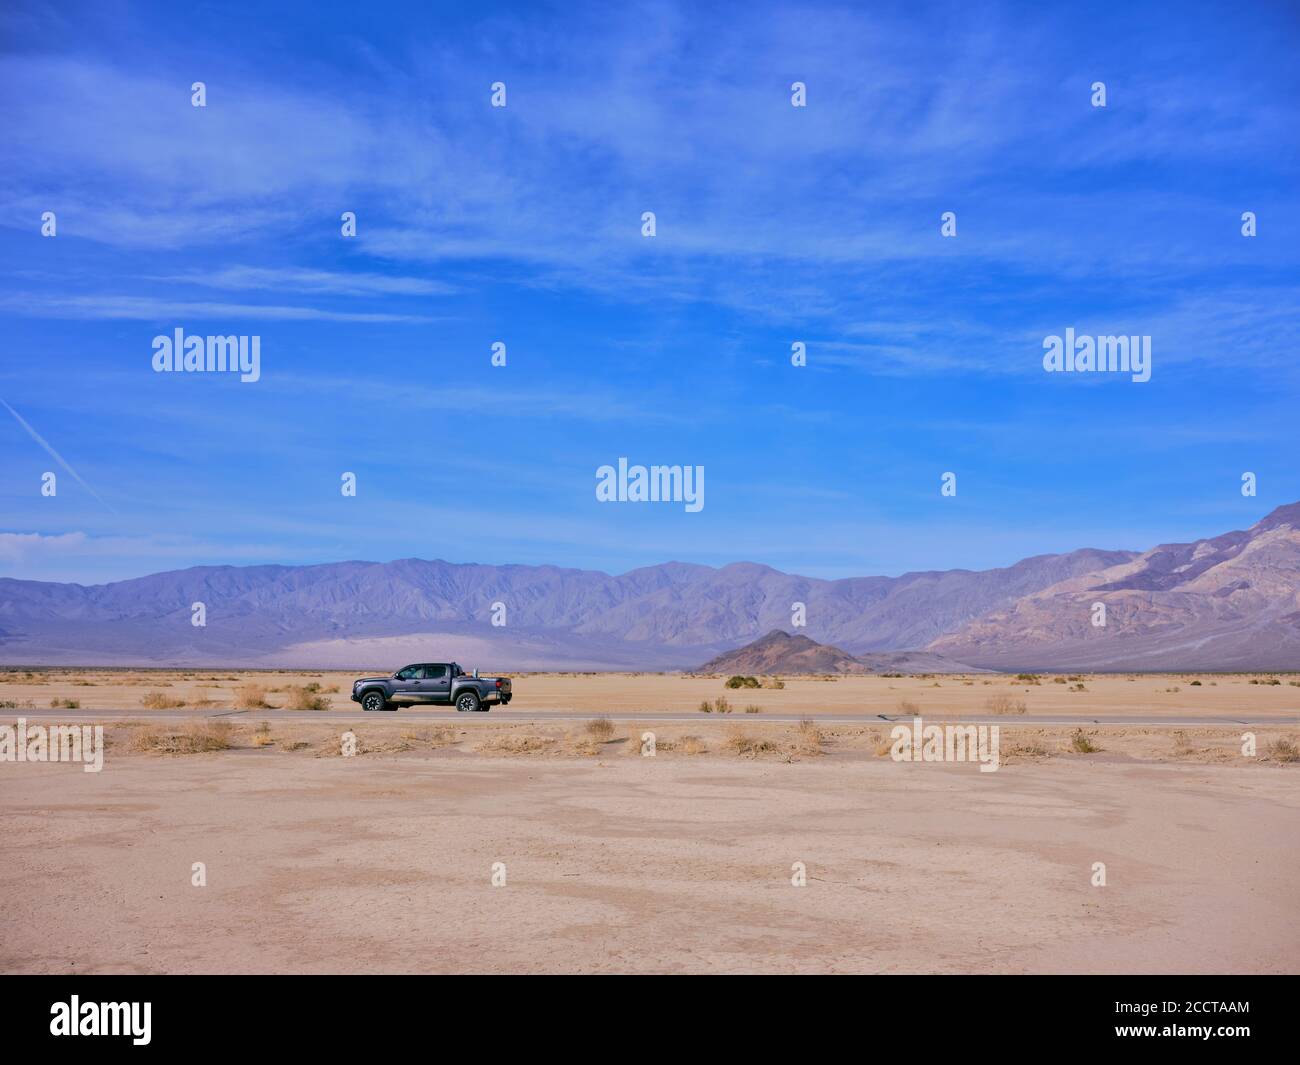 A toyota truck parked on the side of a Death Valley desert highway Stock Photo